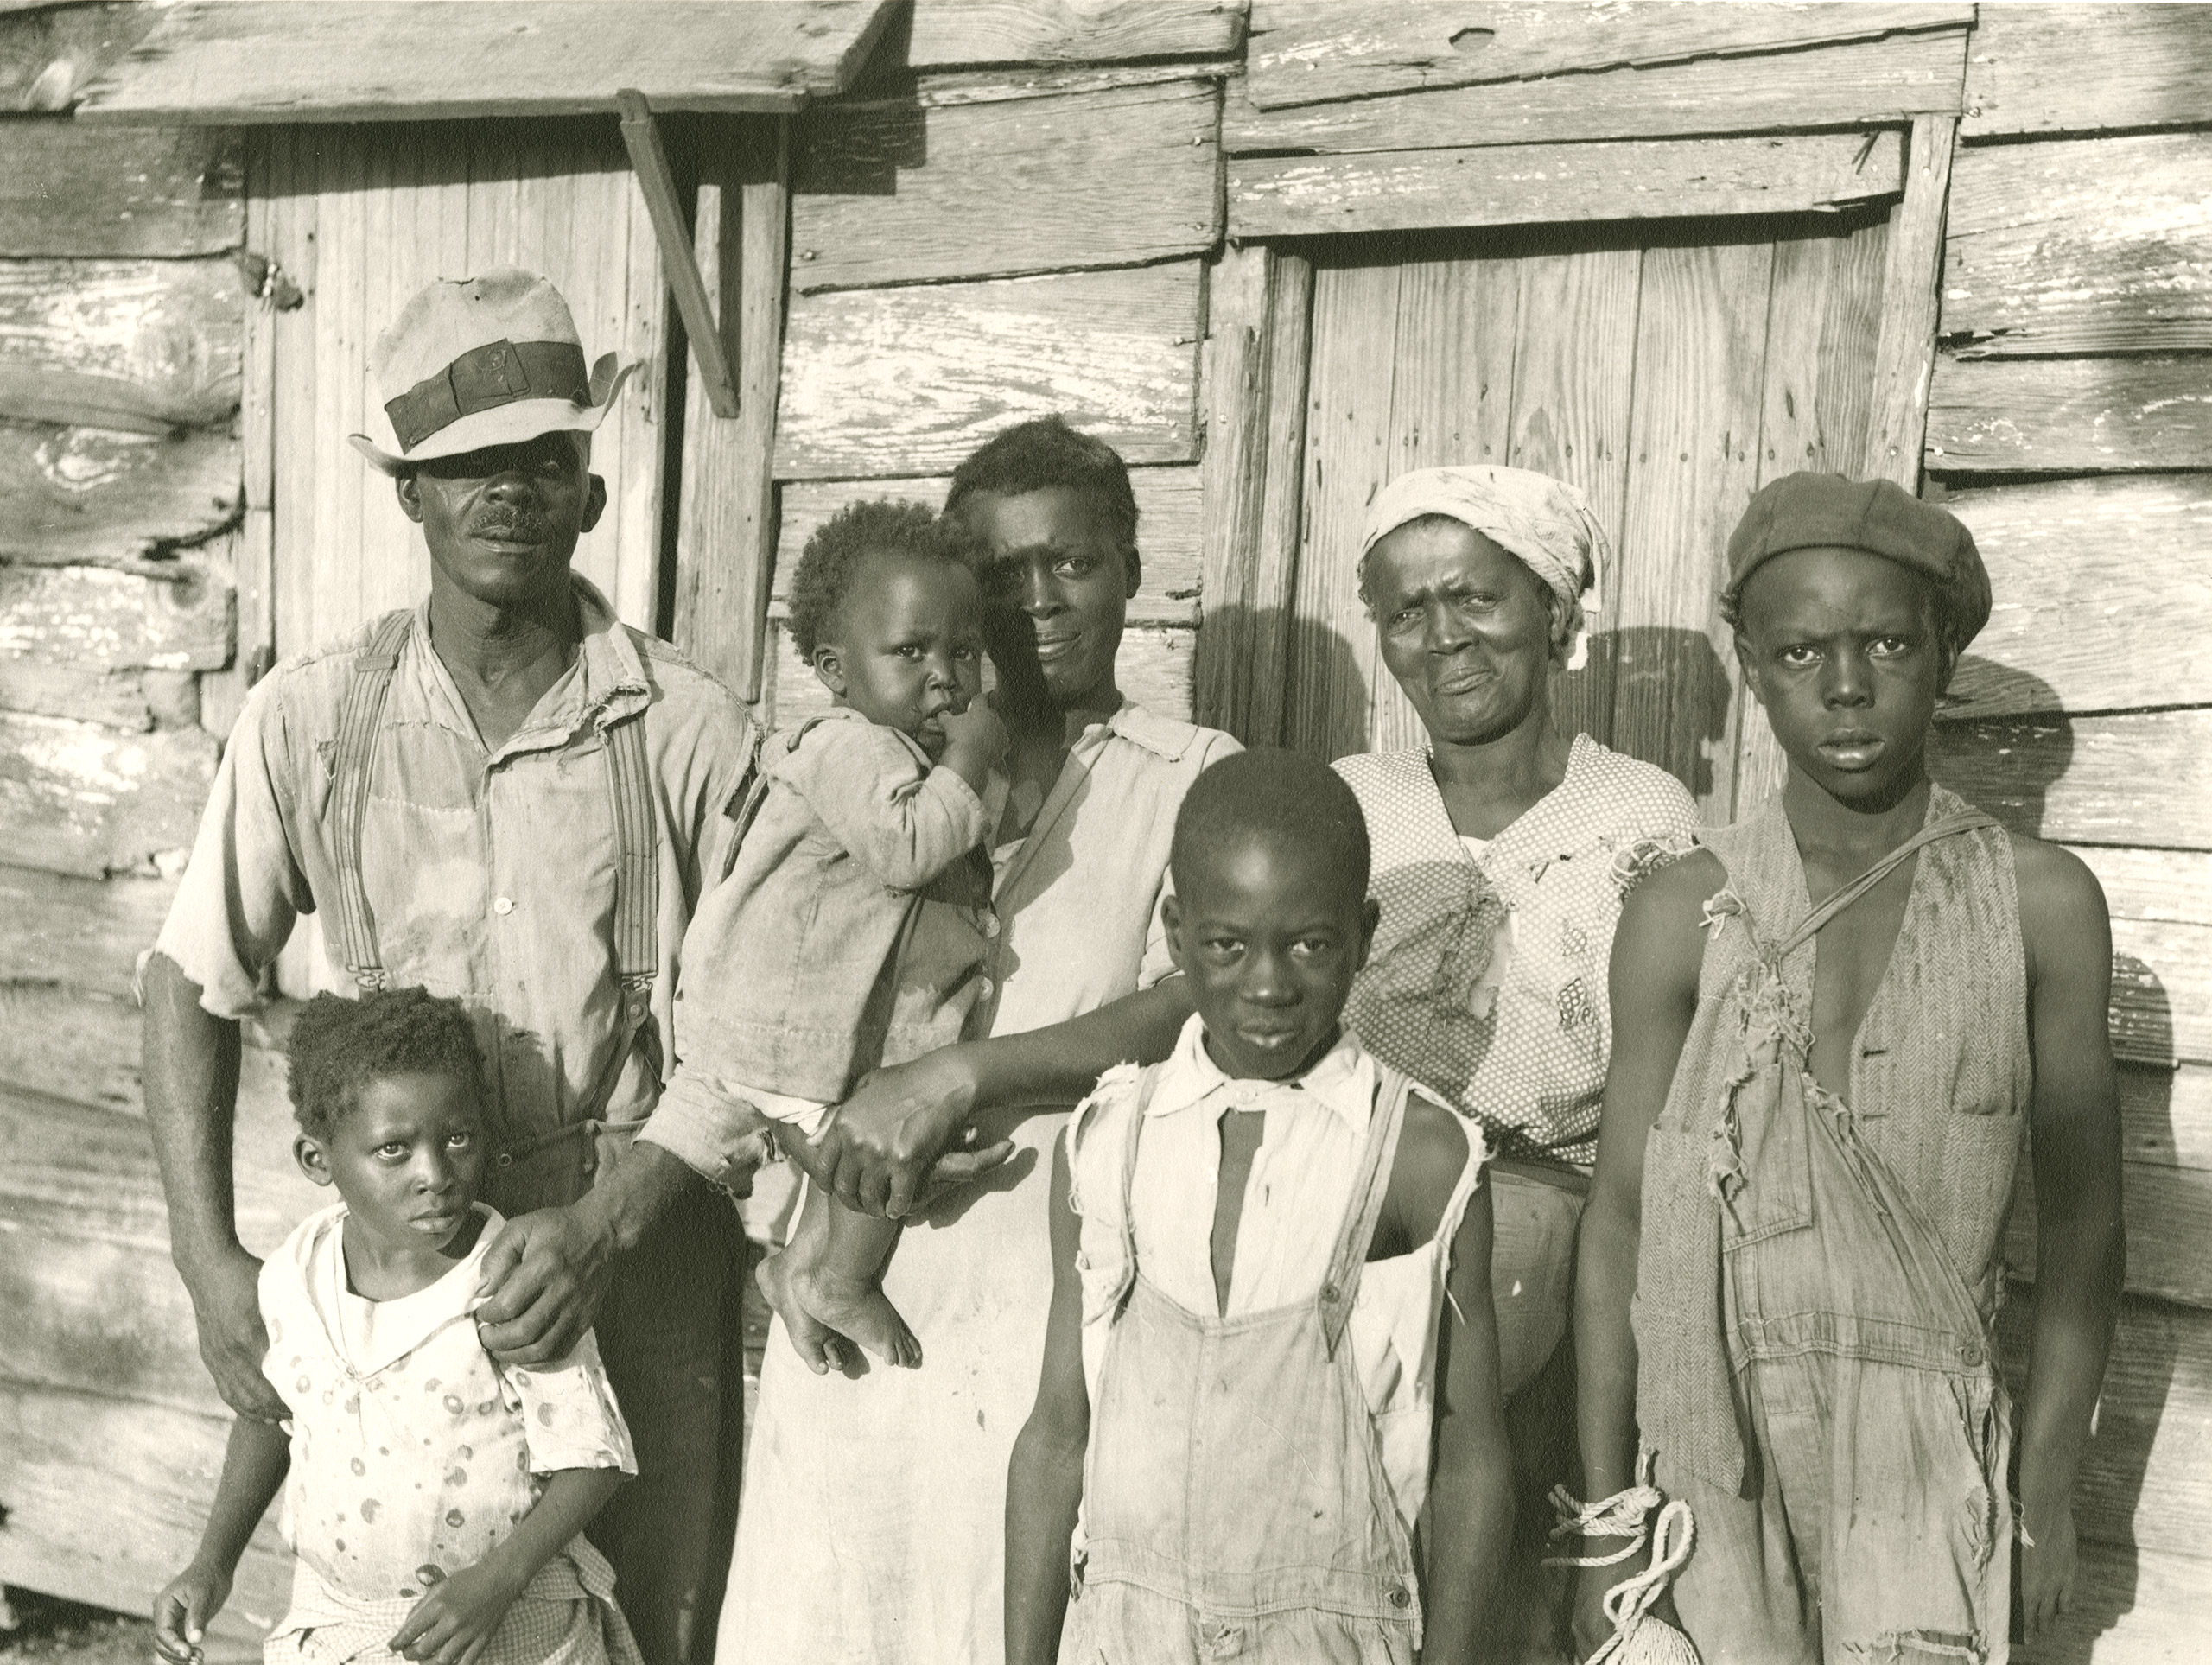 Rehabilitation client and his family on Lady's Sound off Beaufort, S.C., 1936.